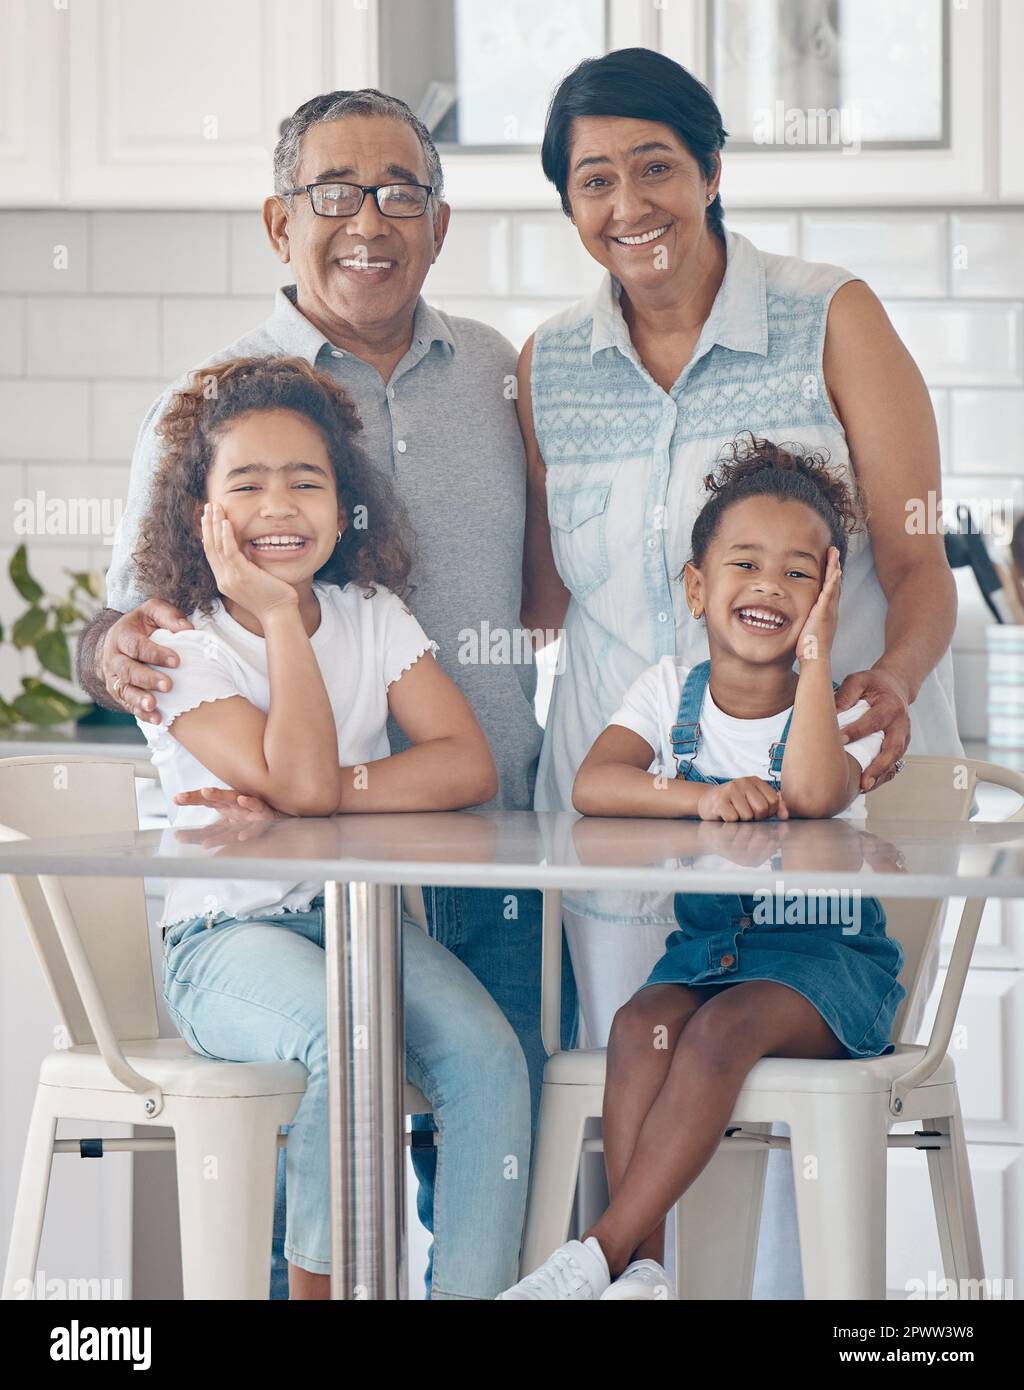 Seeing the little ones grow. grandparents spending time with their grandchildren Stock Photo